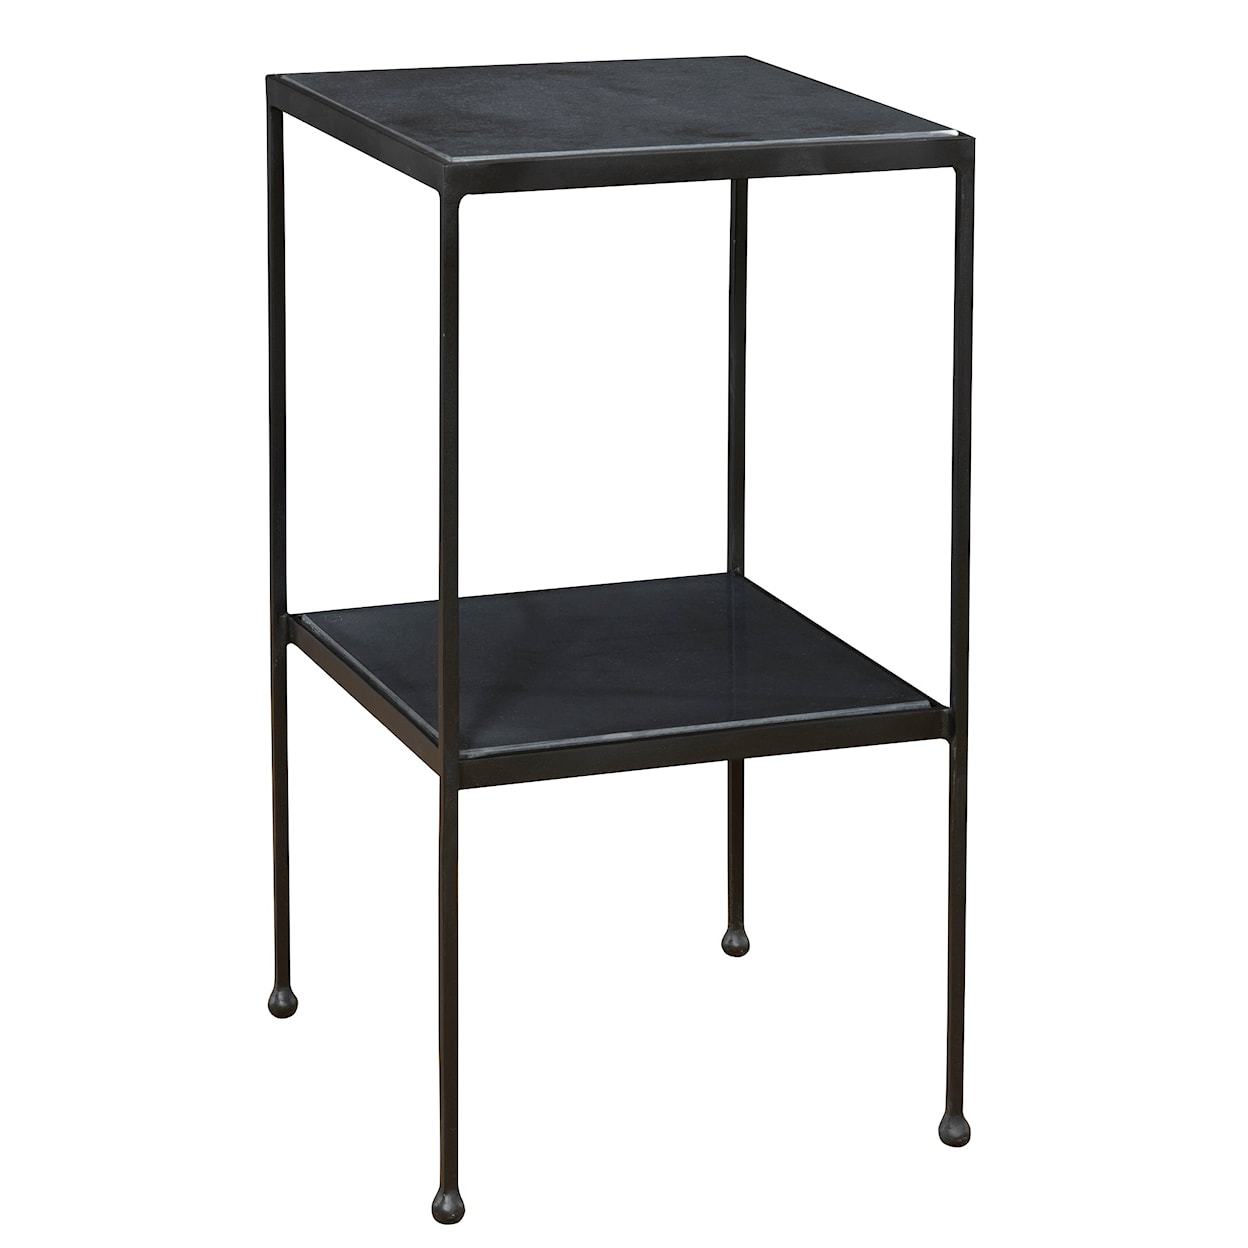 Uttermost Sherwood Square Marble Accent Table with Shelving